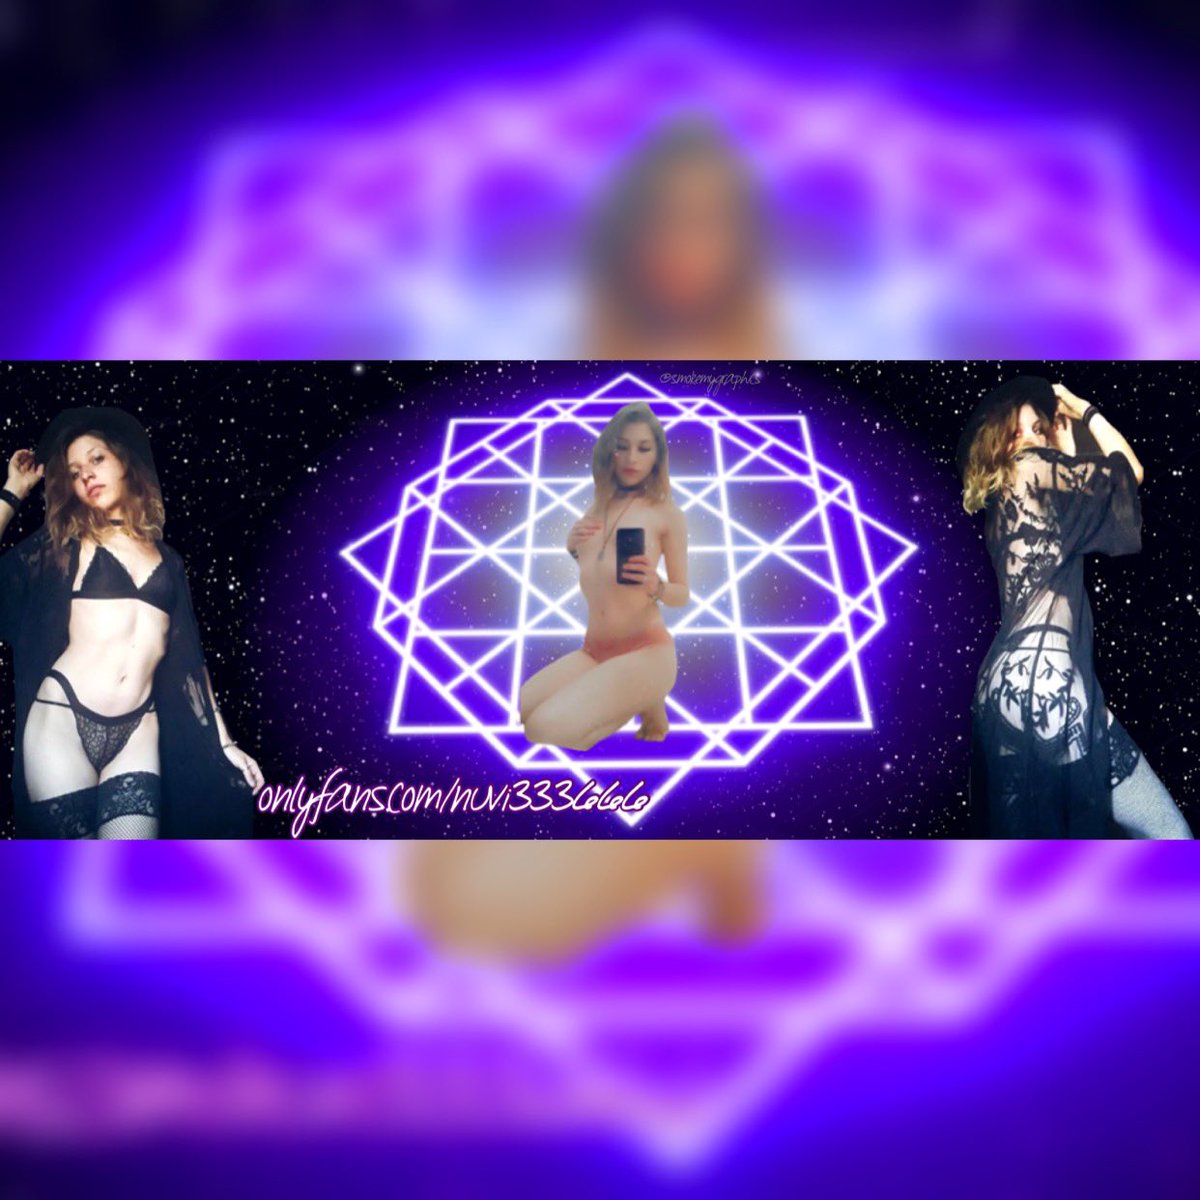 Only fans banner